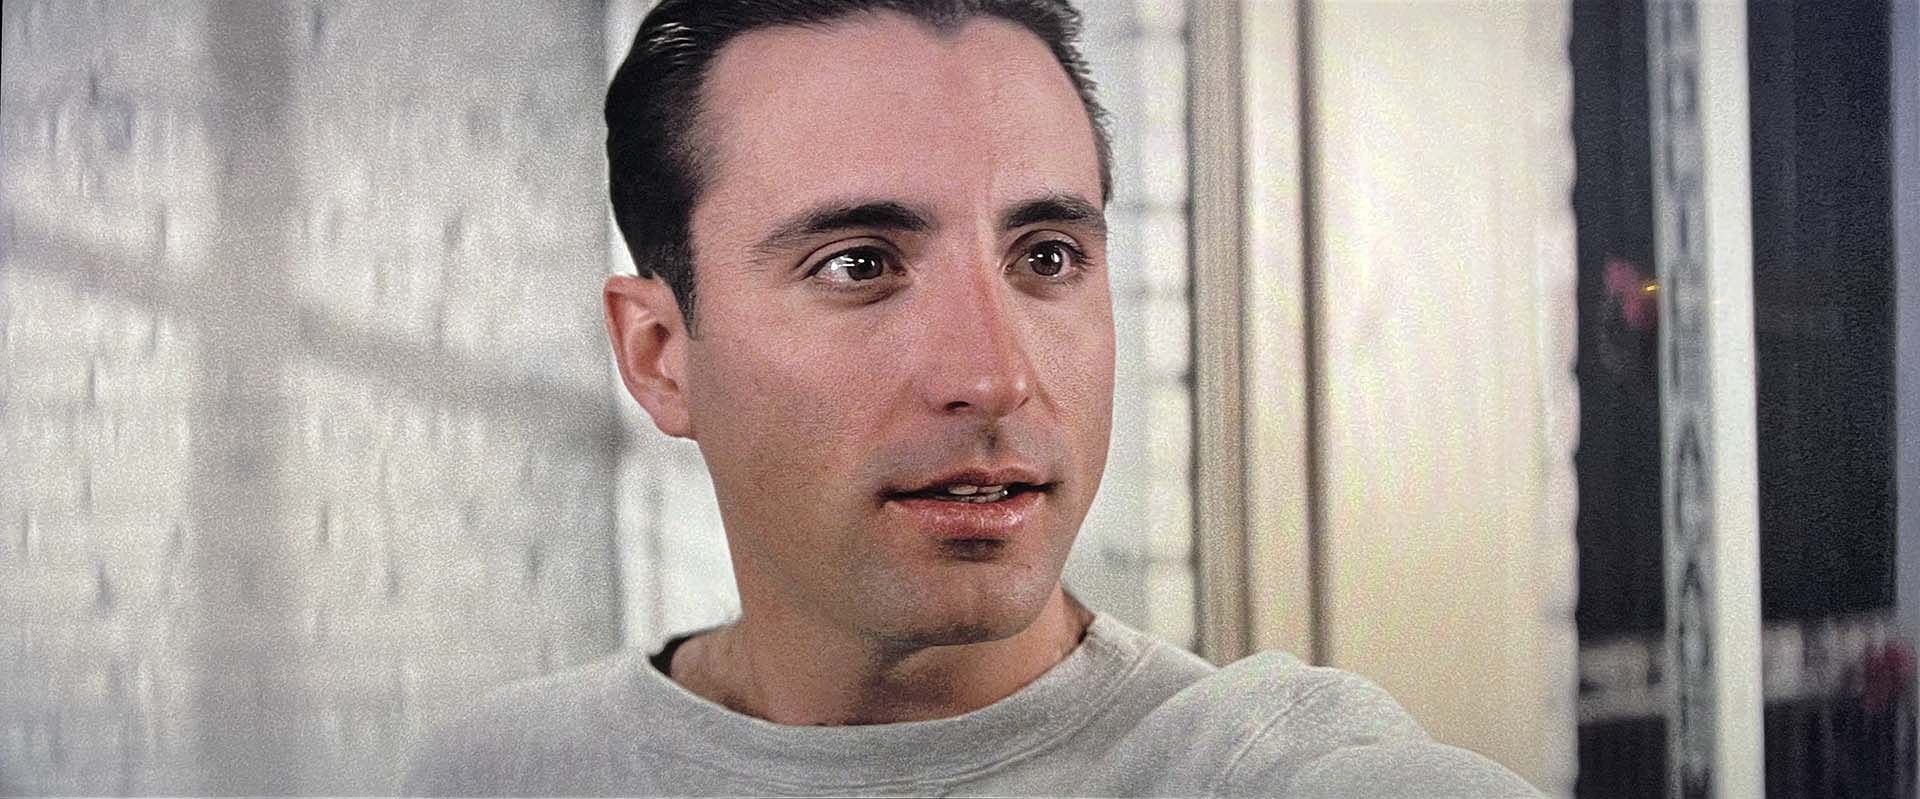 the untouchables george stone andy garcia 1